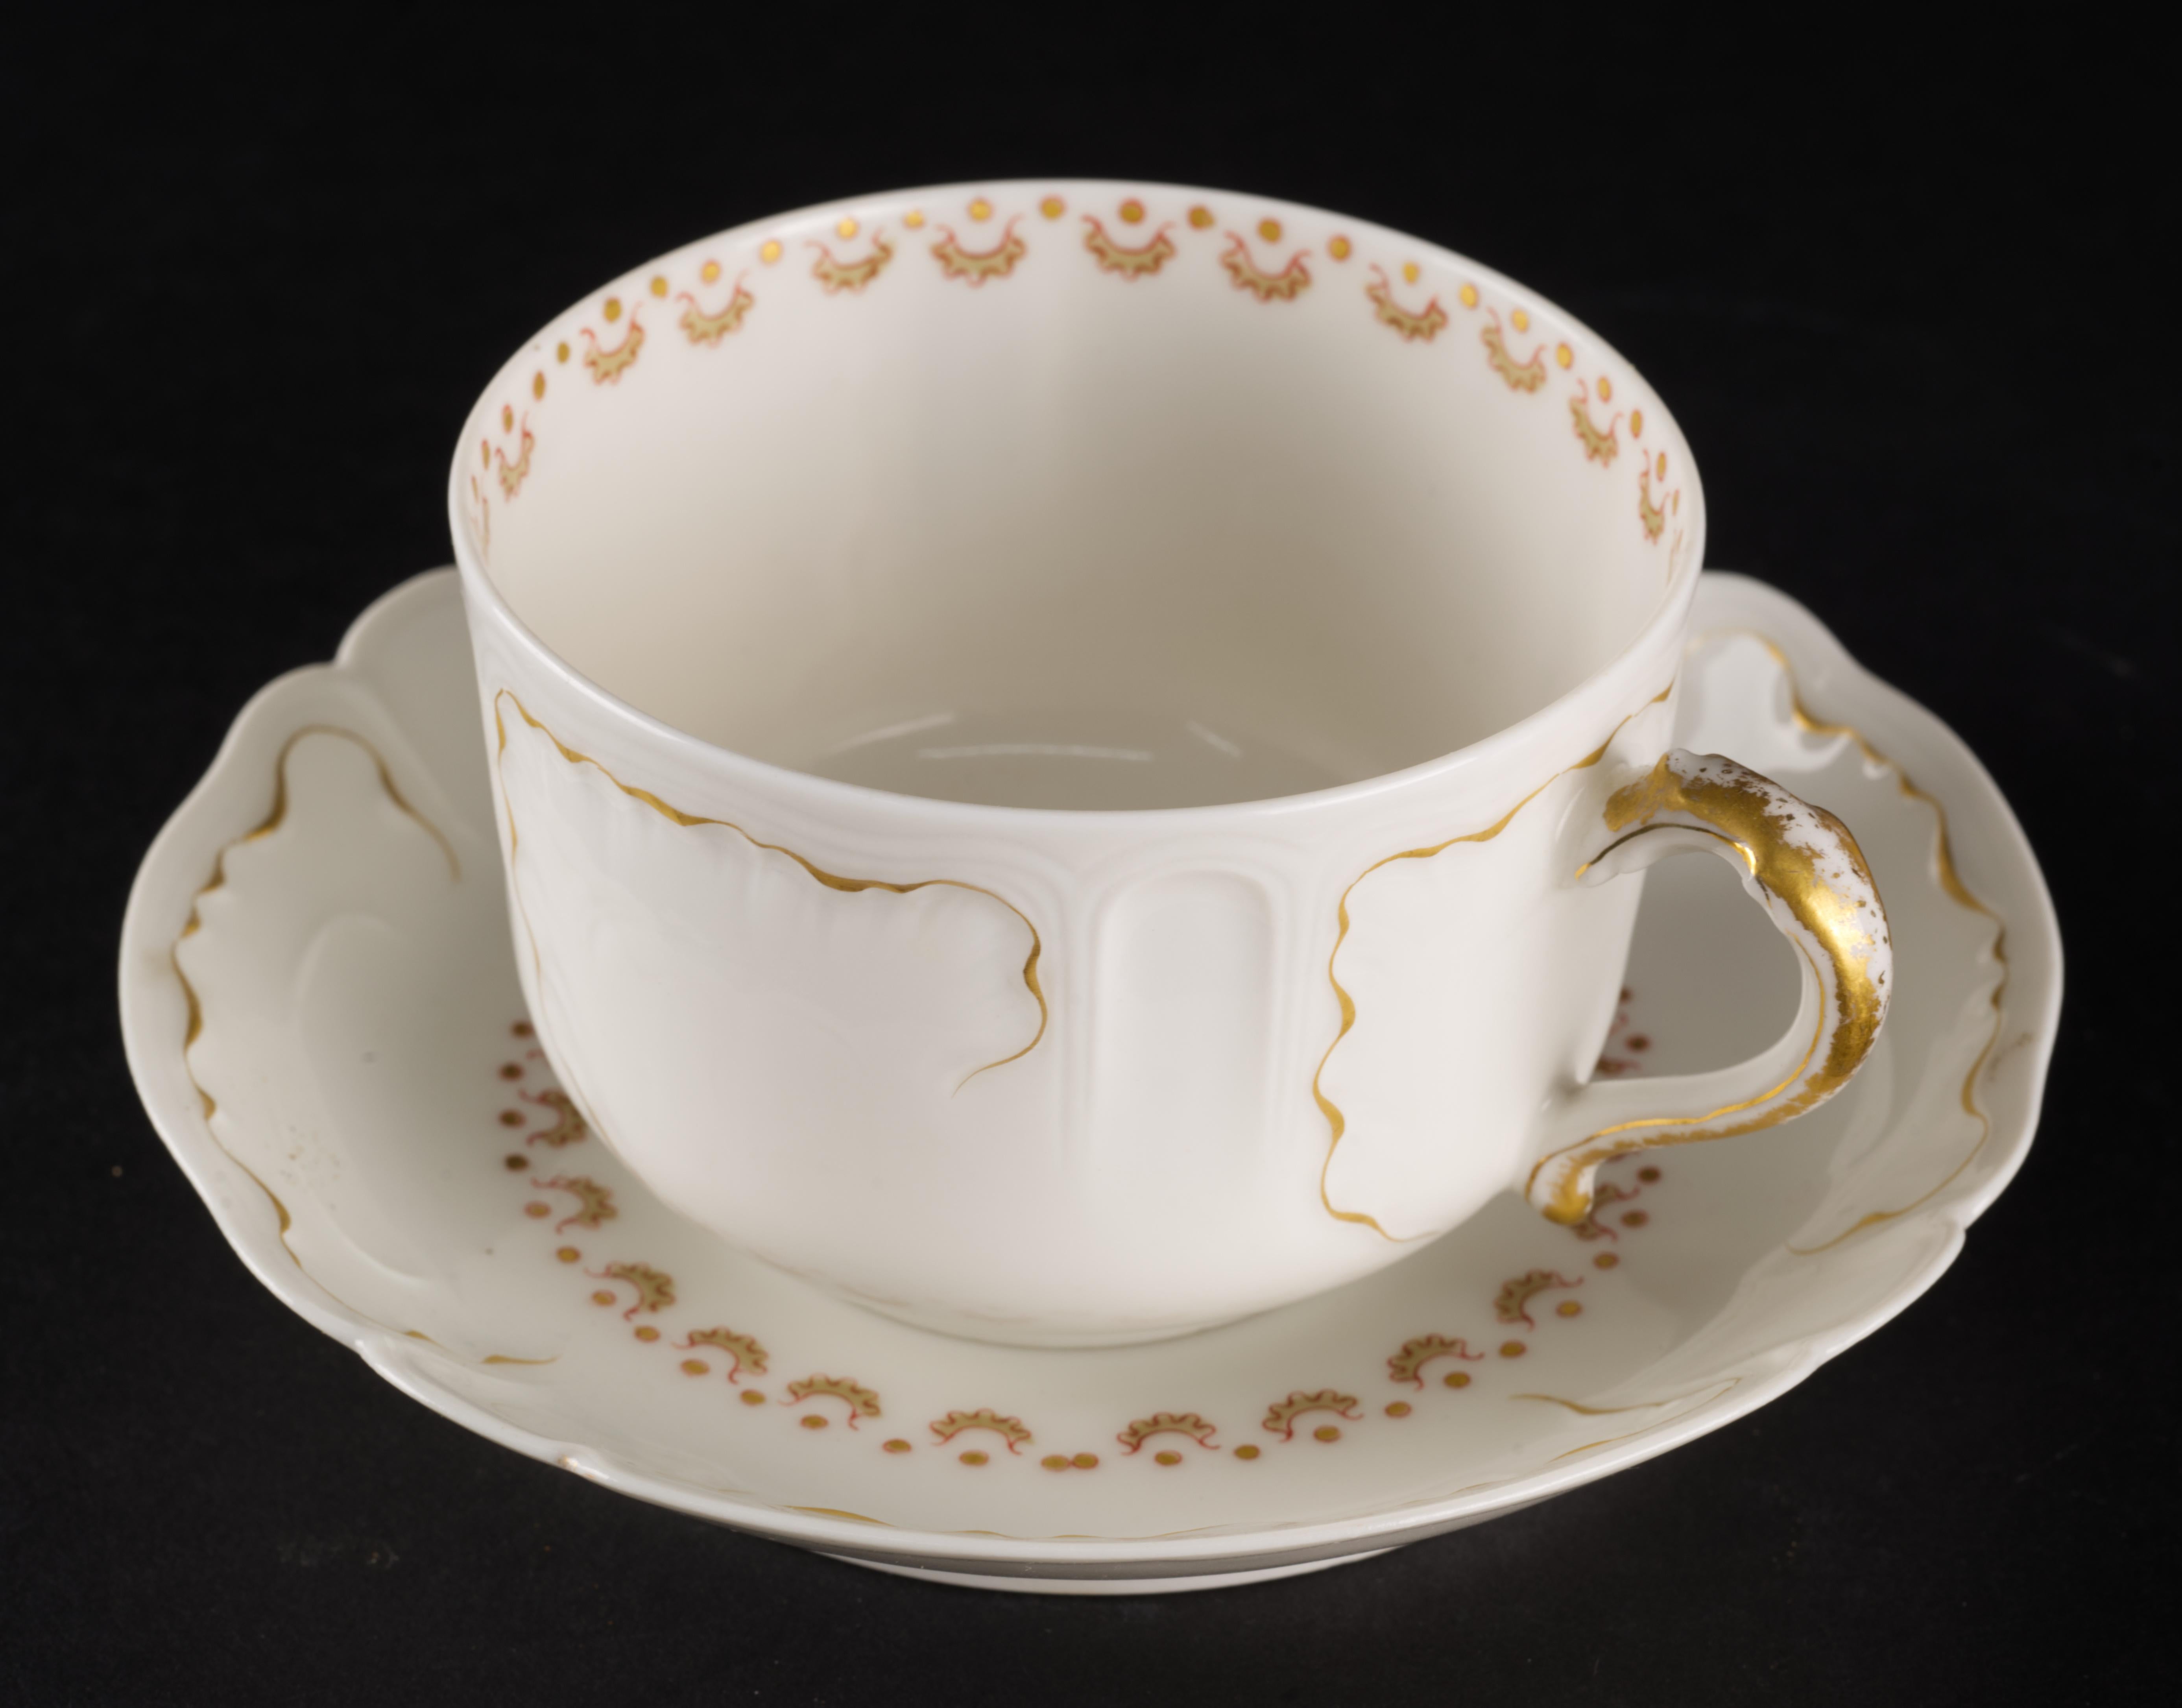 
Haviland Limoges cup and saucer set was made of thin, semi-translucent porcelain and hand decorated in delicate gold, dark red, and pale grey palette. Gold outlines were used to enhance the complex cup and saucer shapes in a manner reminiscent of